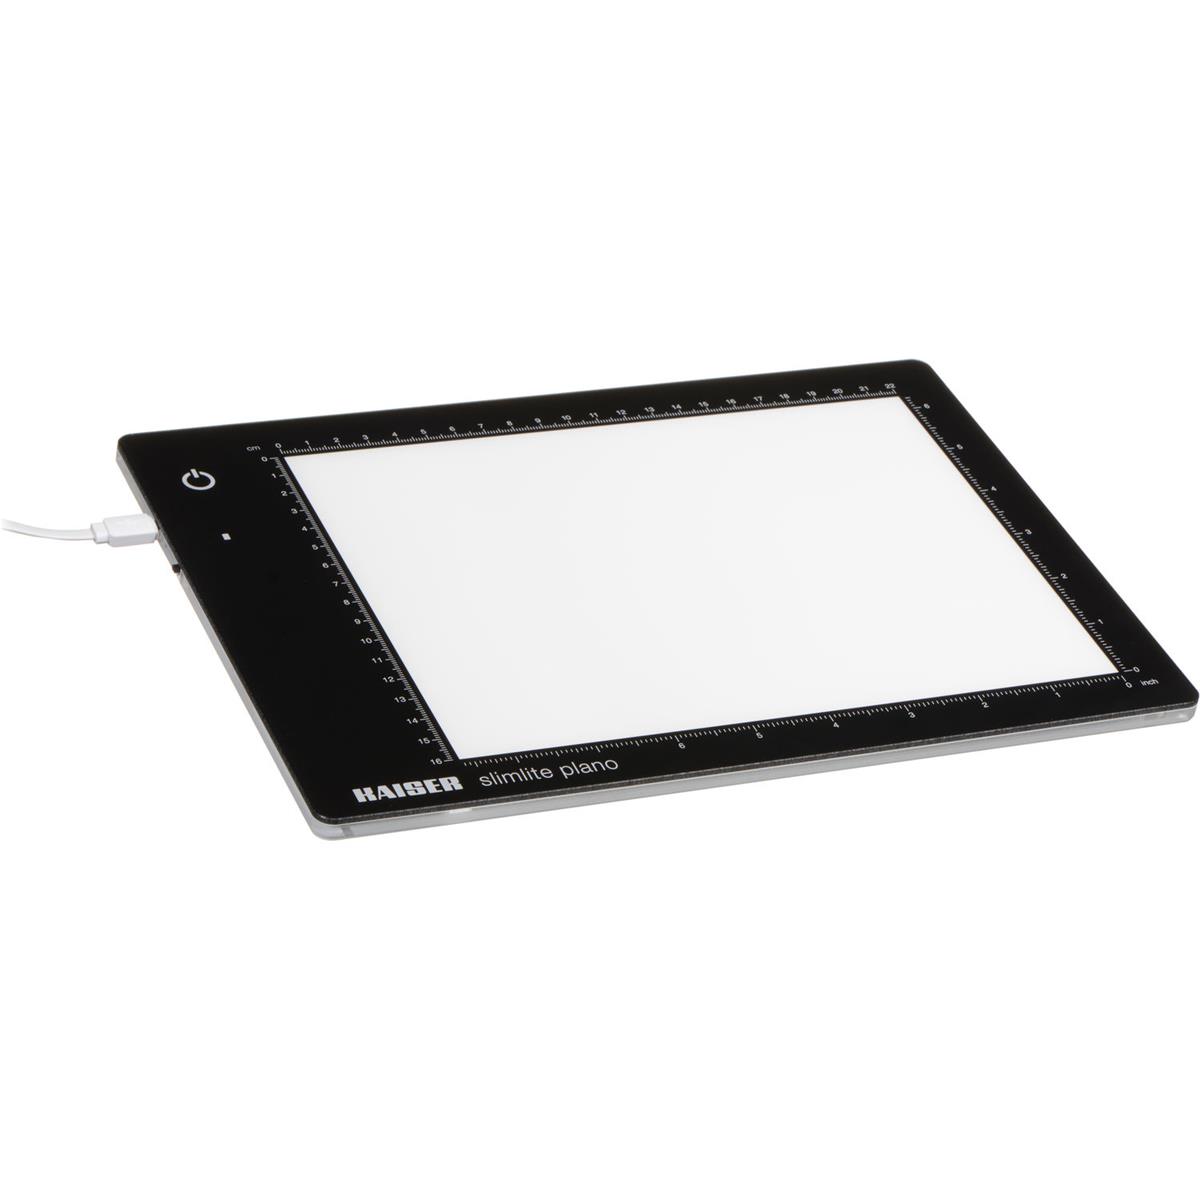 Kaiser Slimlite Plano 5000K 8x11"  Battery/AC Lightbox with USB Cable and Charging Adapter